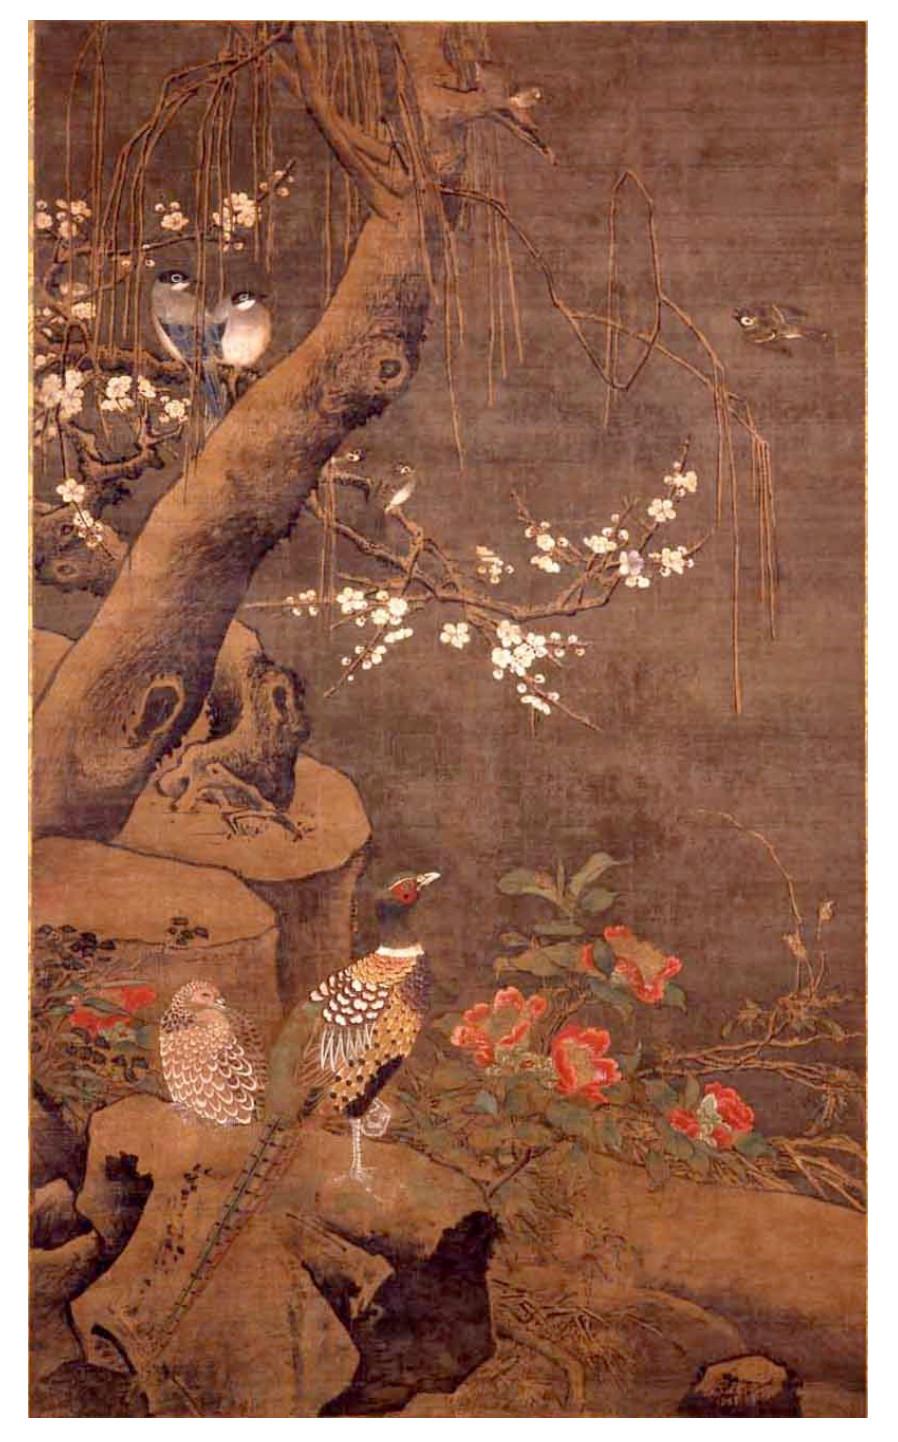 Ogata Tomin (1839 -1895)

Birds in a spring landscape

Ink and colour on silk.

Inscription reads:
“Copy of Lu Ji, painted with heartfelt appreciation”
“Painted by Tomin Ogata Yosei”

Seal: Yosei

Dimensions:
H. 45” x 22” (114 cm x 55